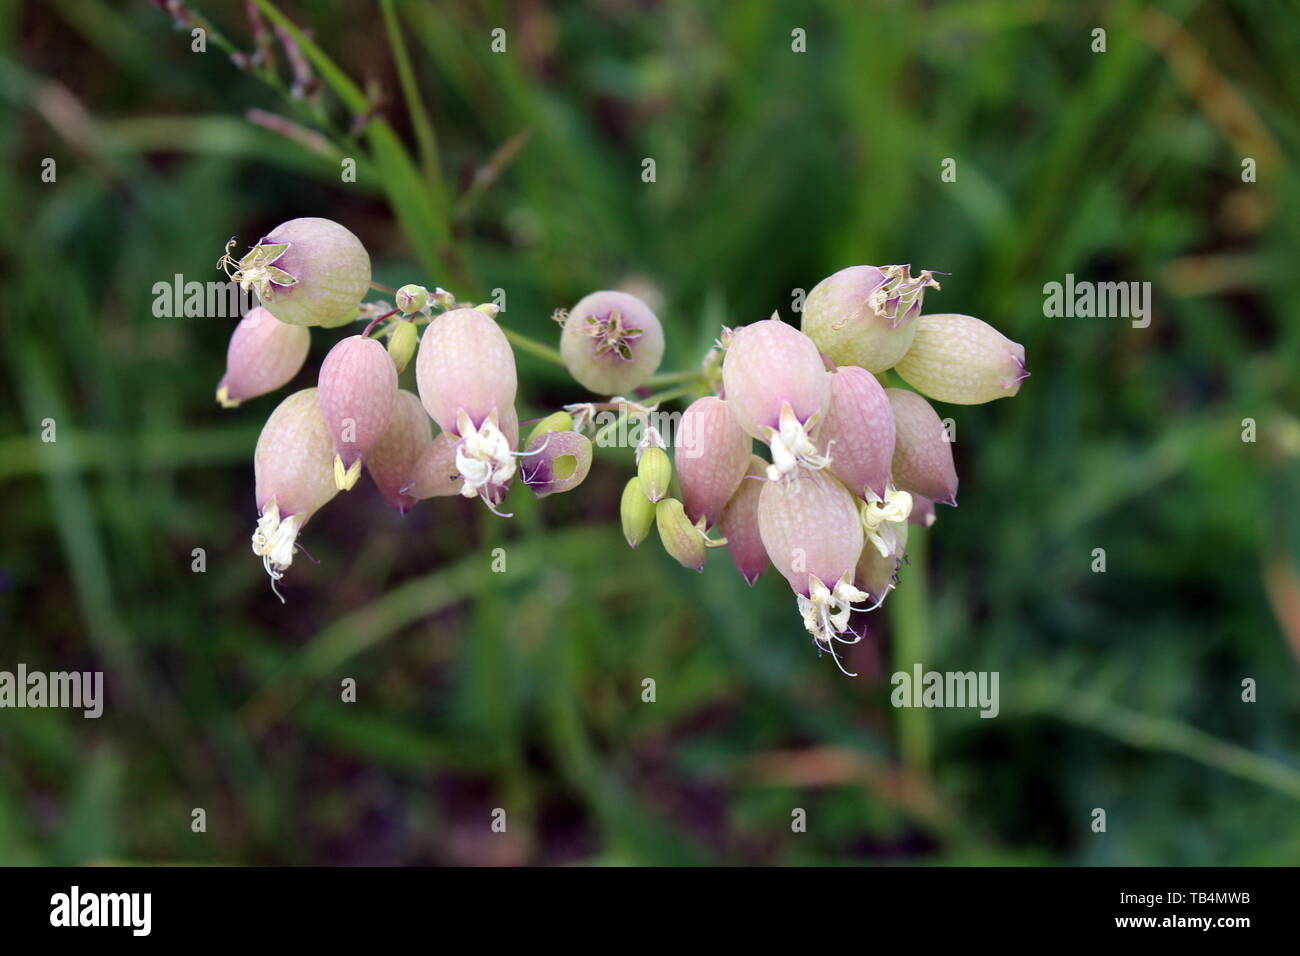 Bunch of Bladder campion or Silene vulgaris or Maidenstears perennial common wildflowers with drooping white flowers and large inflated calyx Stock Photo